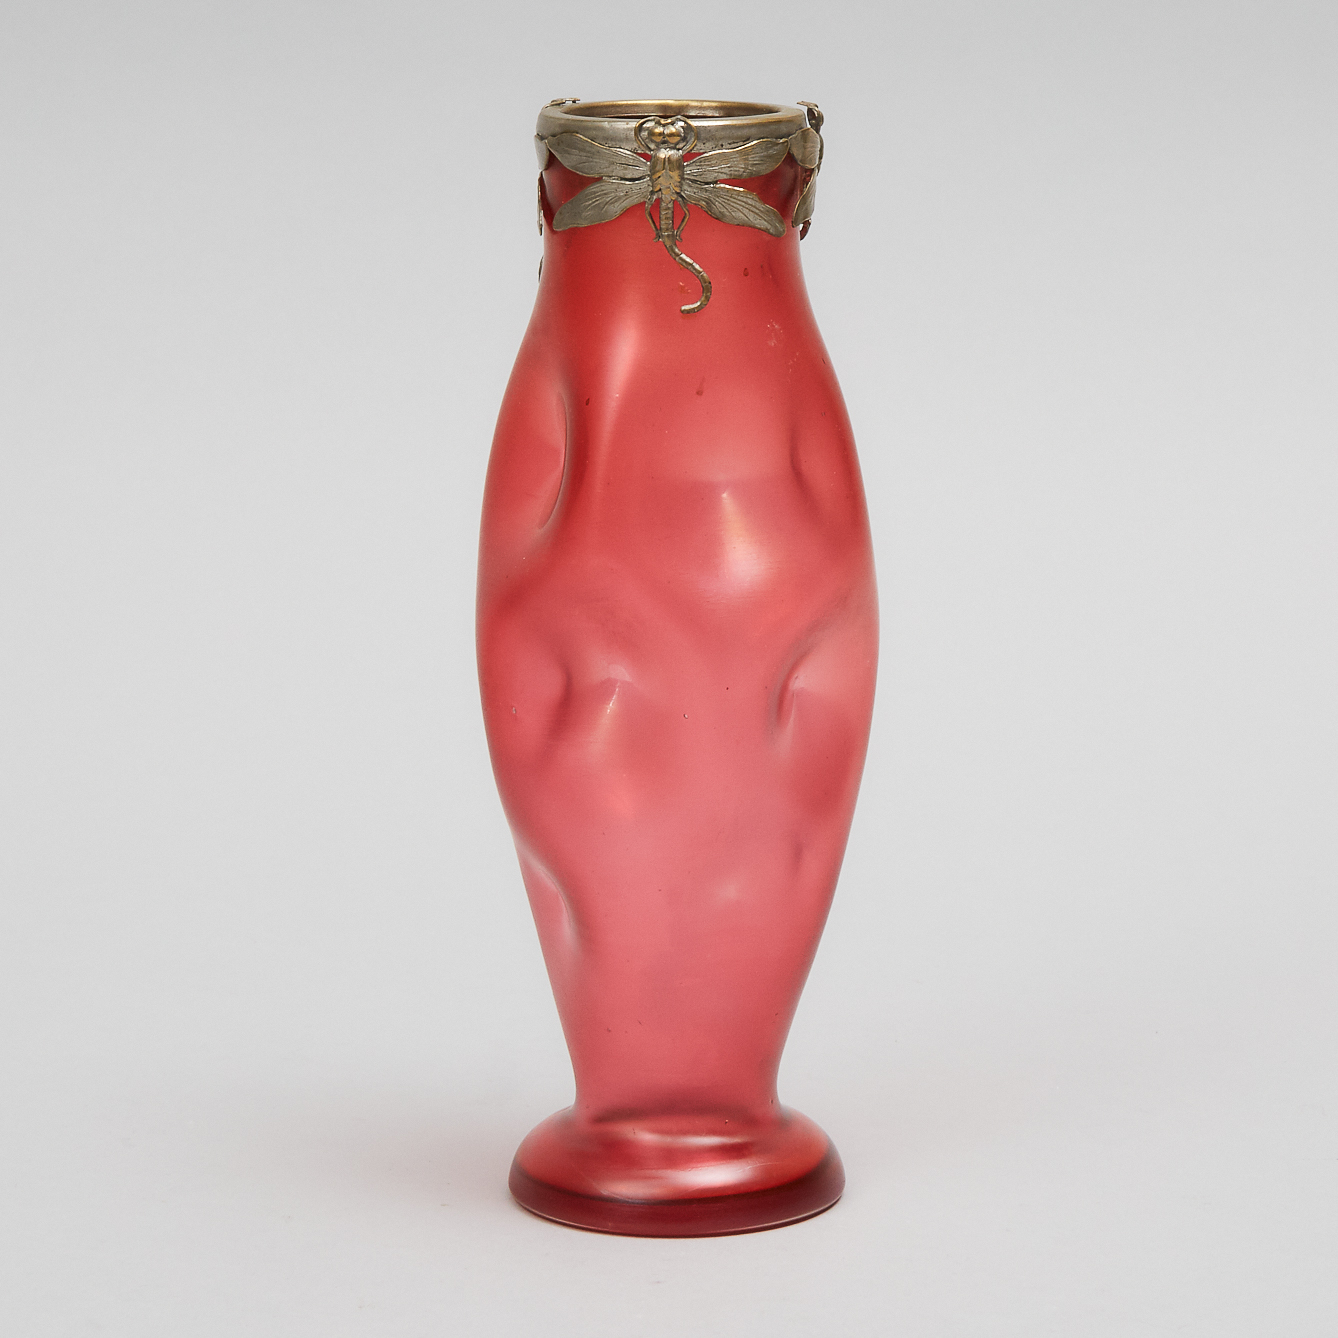 Bohemian Irridescent Red Glass Vase with Dragonfly Mounted Rim, c.1900